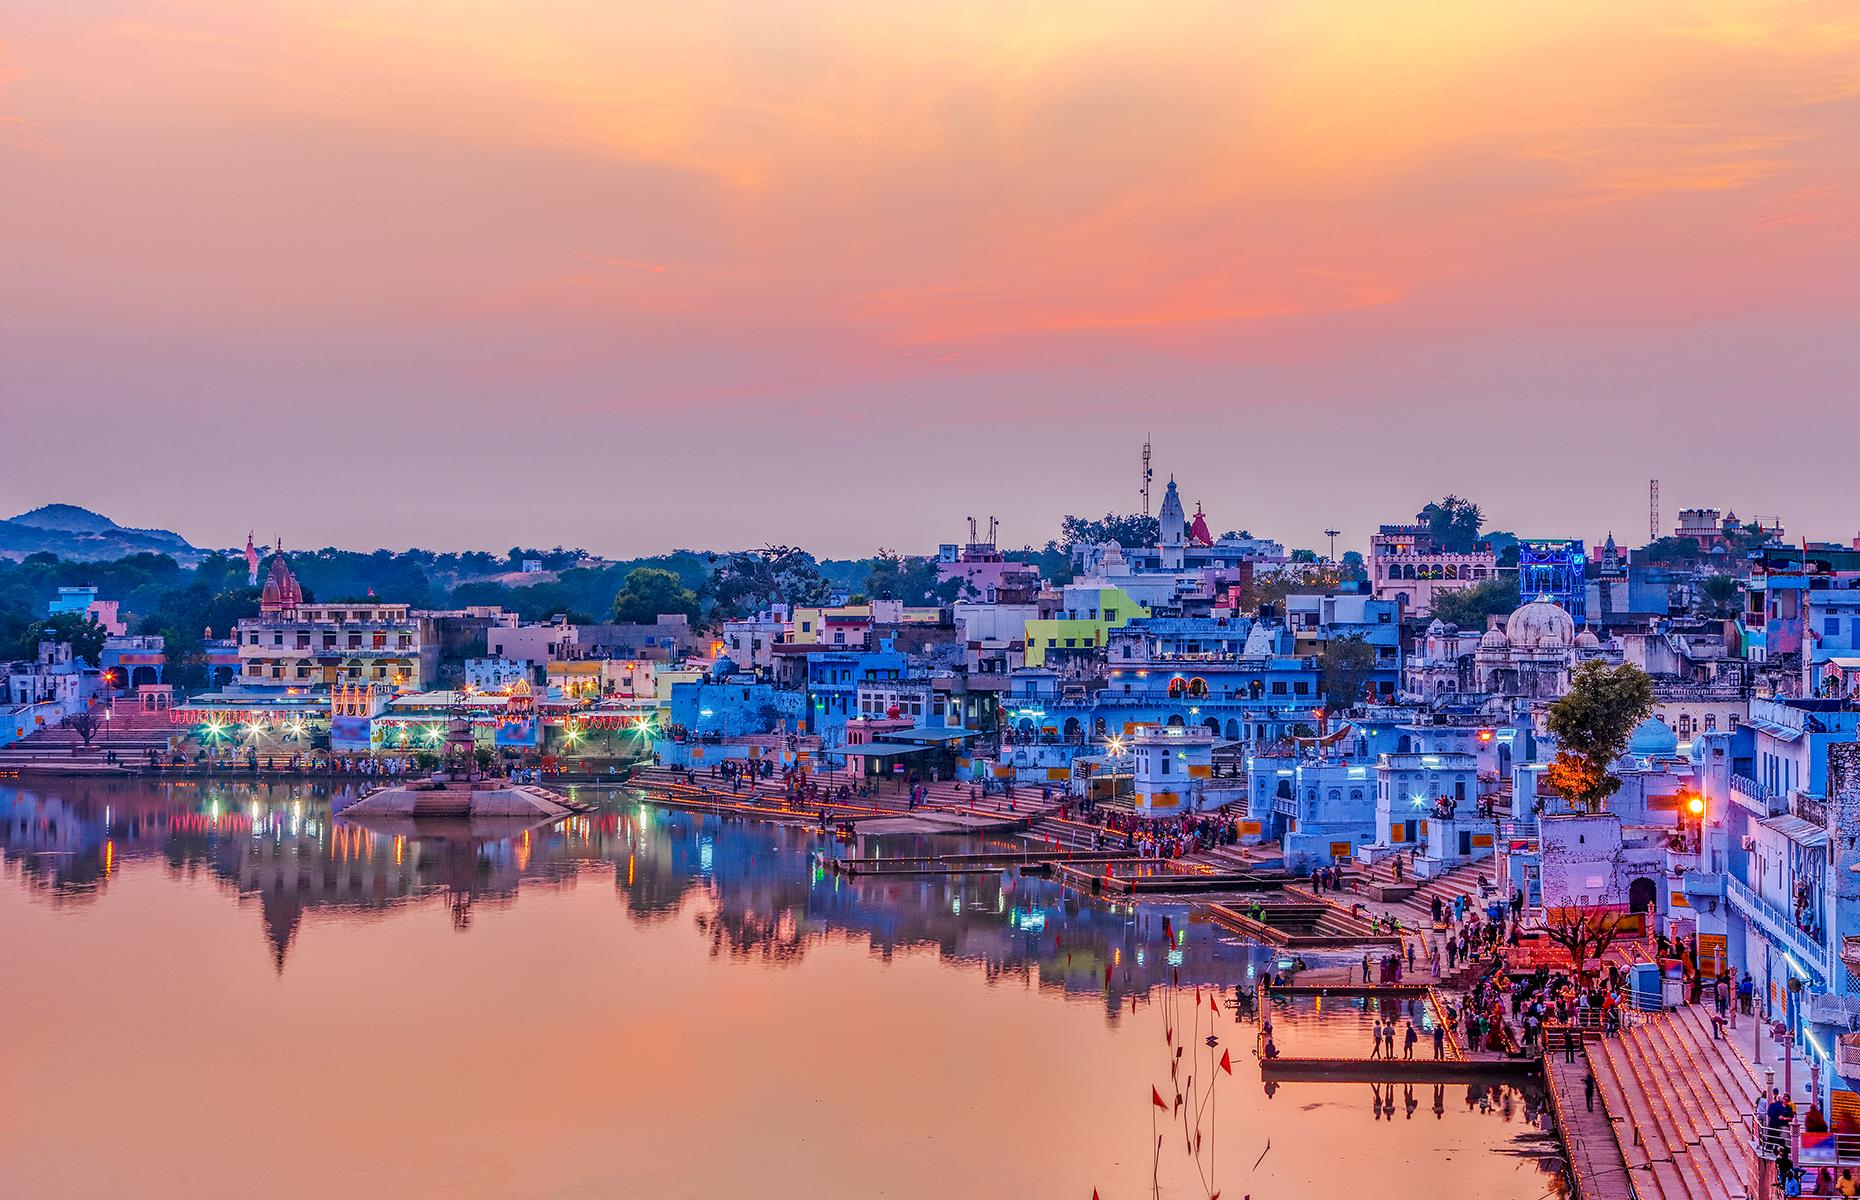 World famous for its November camel fair, in which hundreds of vendors come to sell their camels in the desert just outside the city, there's plenty of reason to visit Pushkar year-round. One of its highlights is Holy Lake, which at dusk is a gorgeous combination of pink skies, glassy waters, and blueish tumbledown houses.